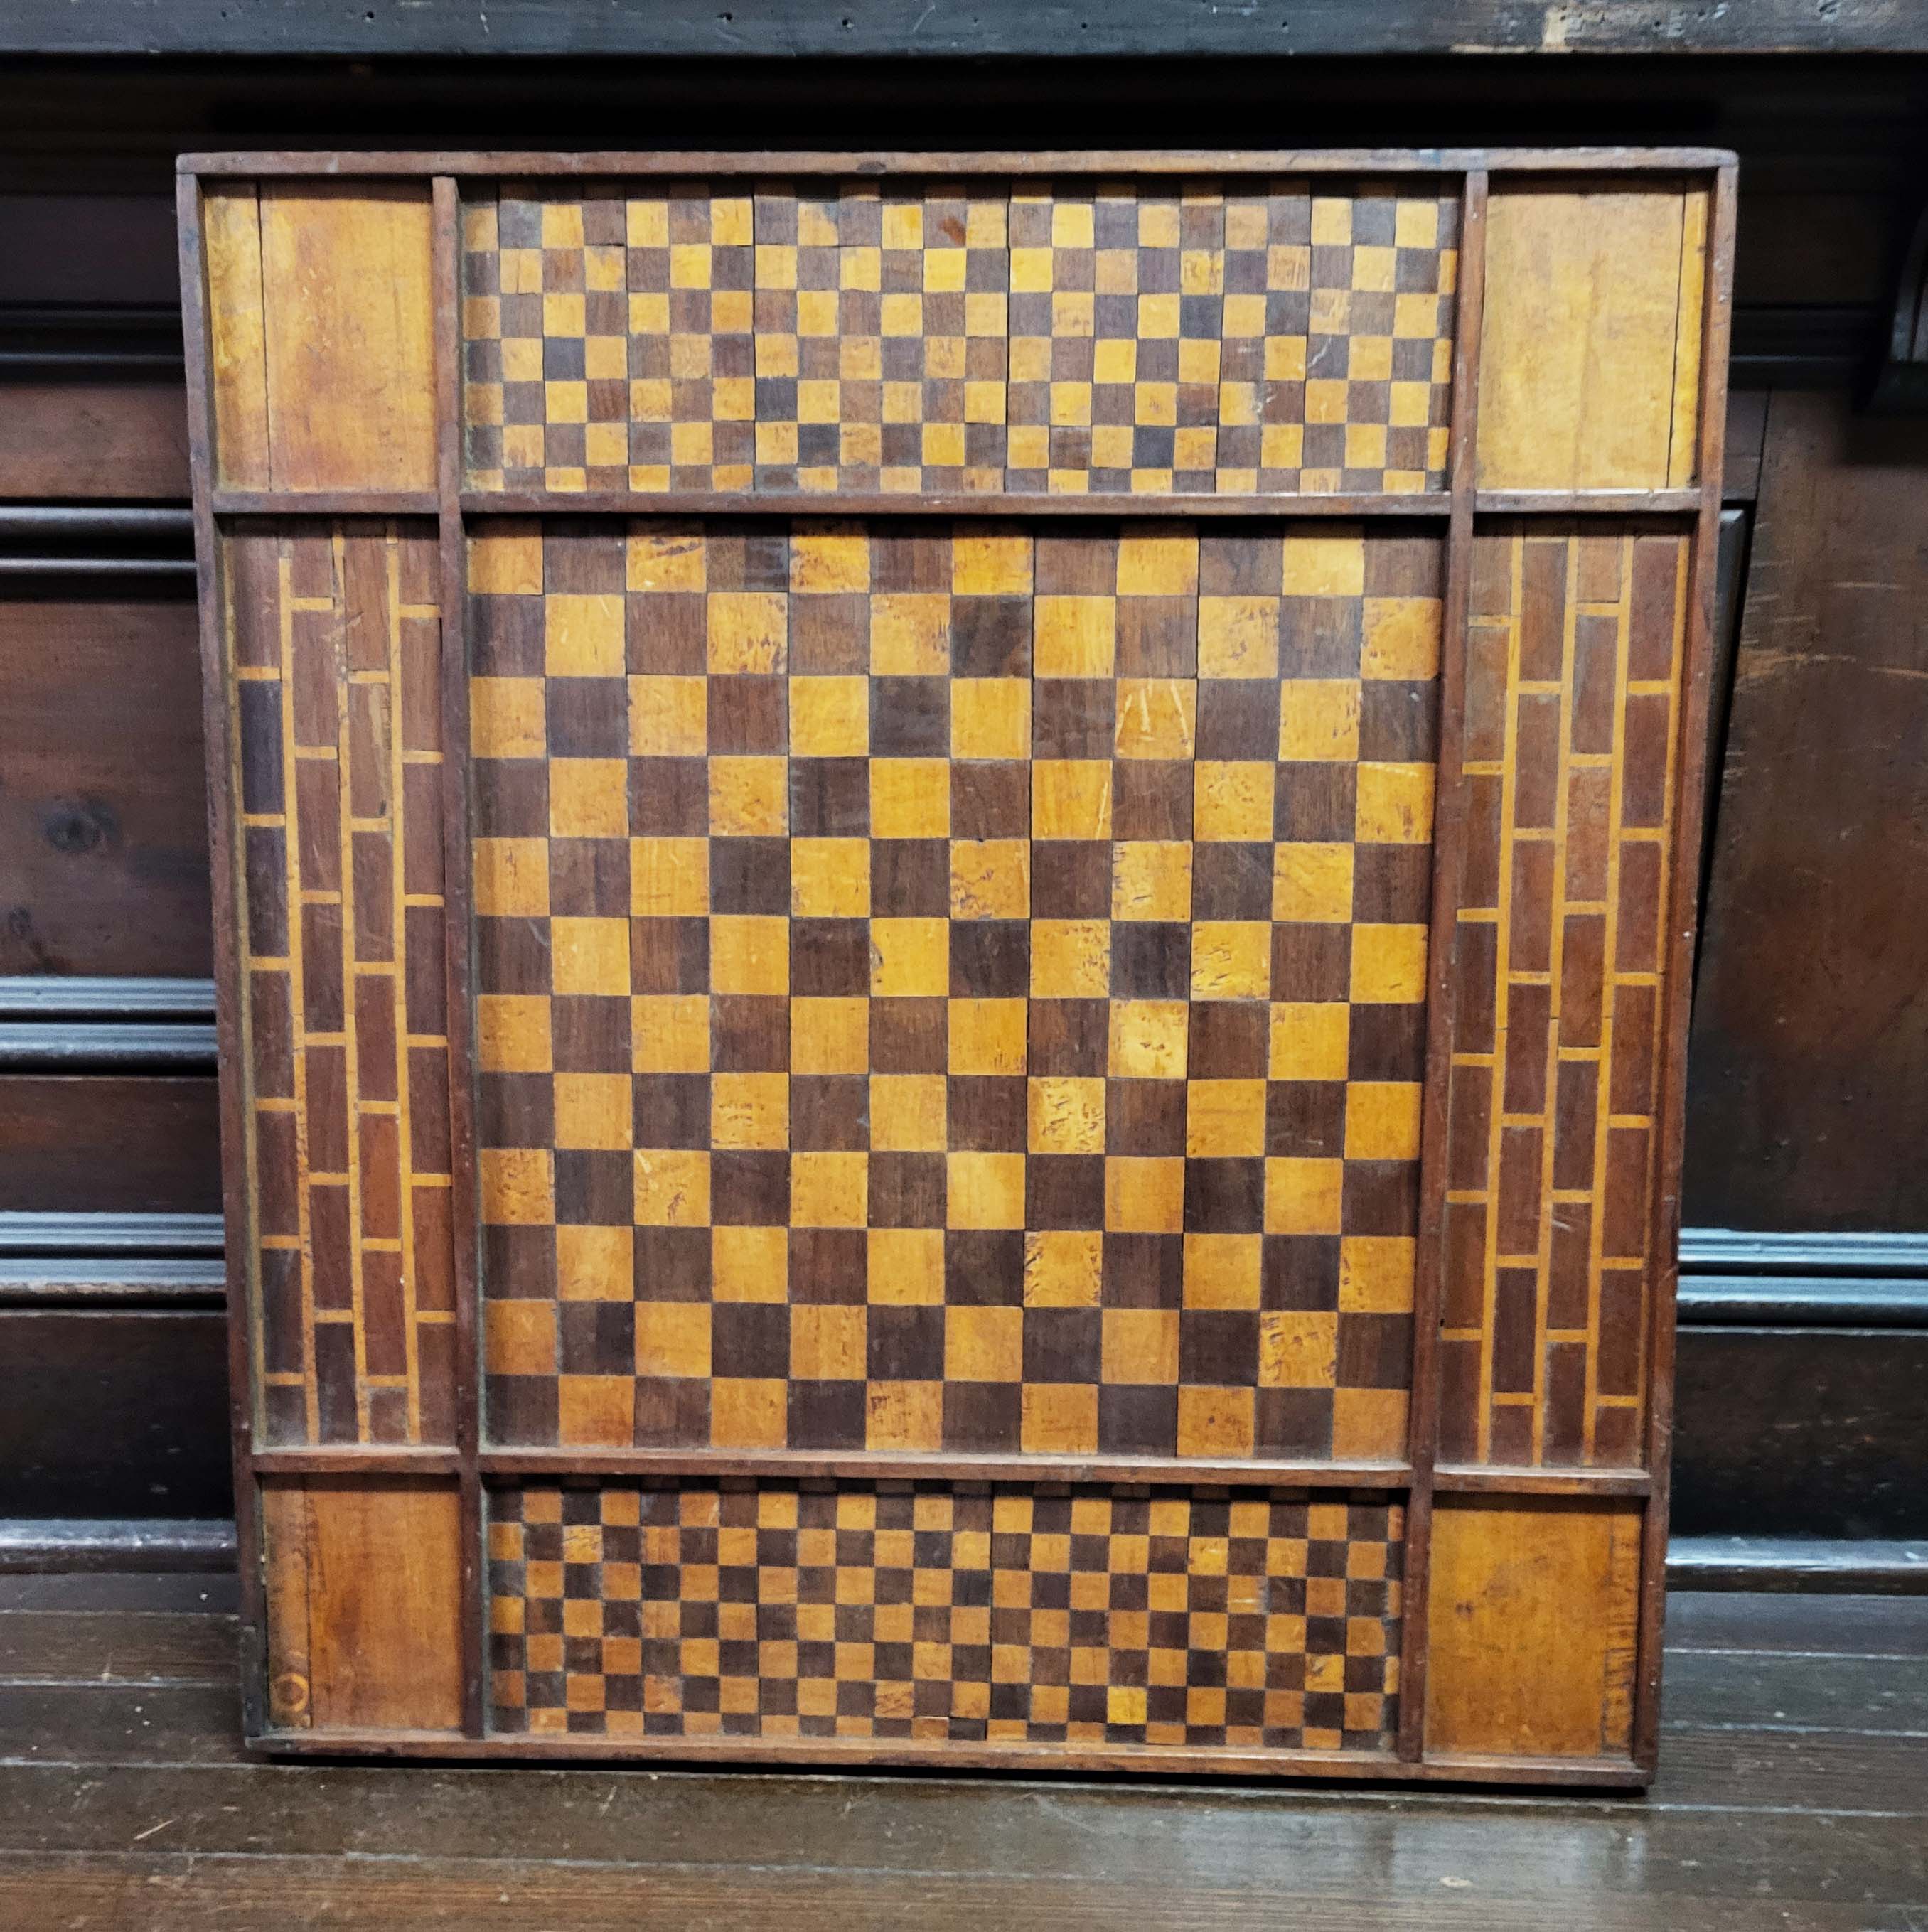 ANTIQUE DOUBLE SIDED GAMEBOARD